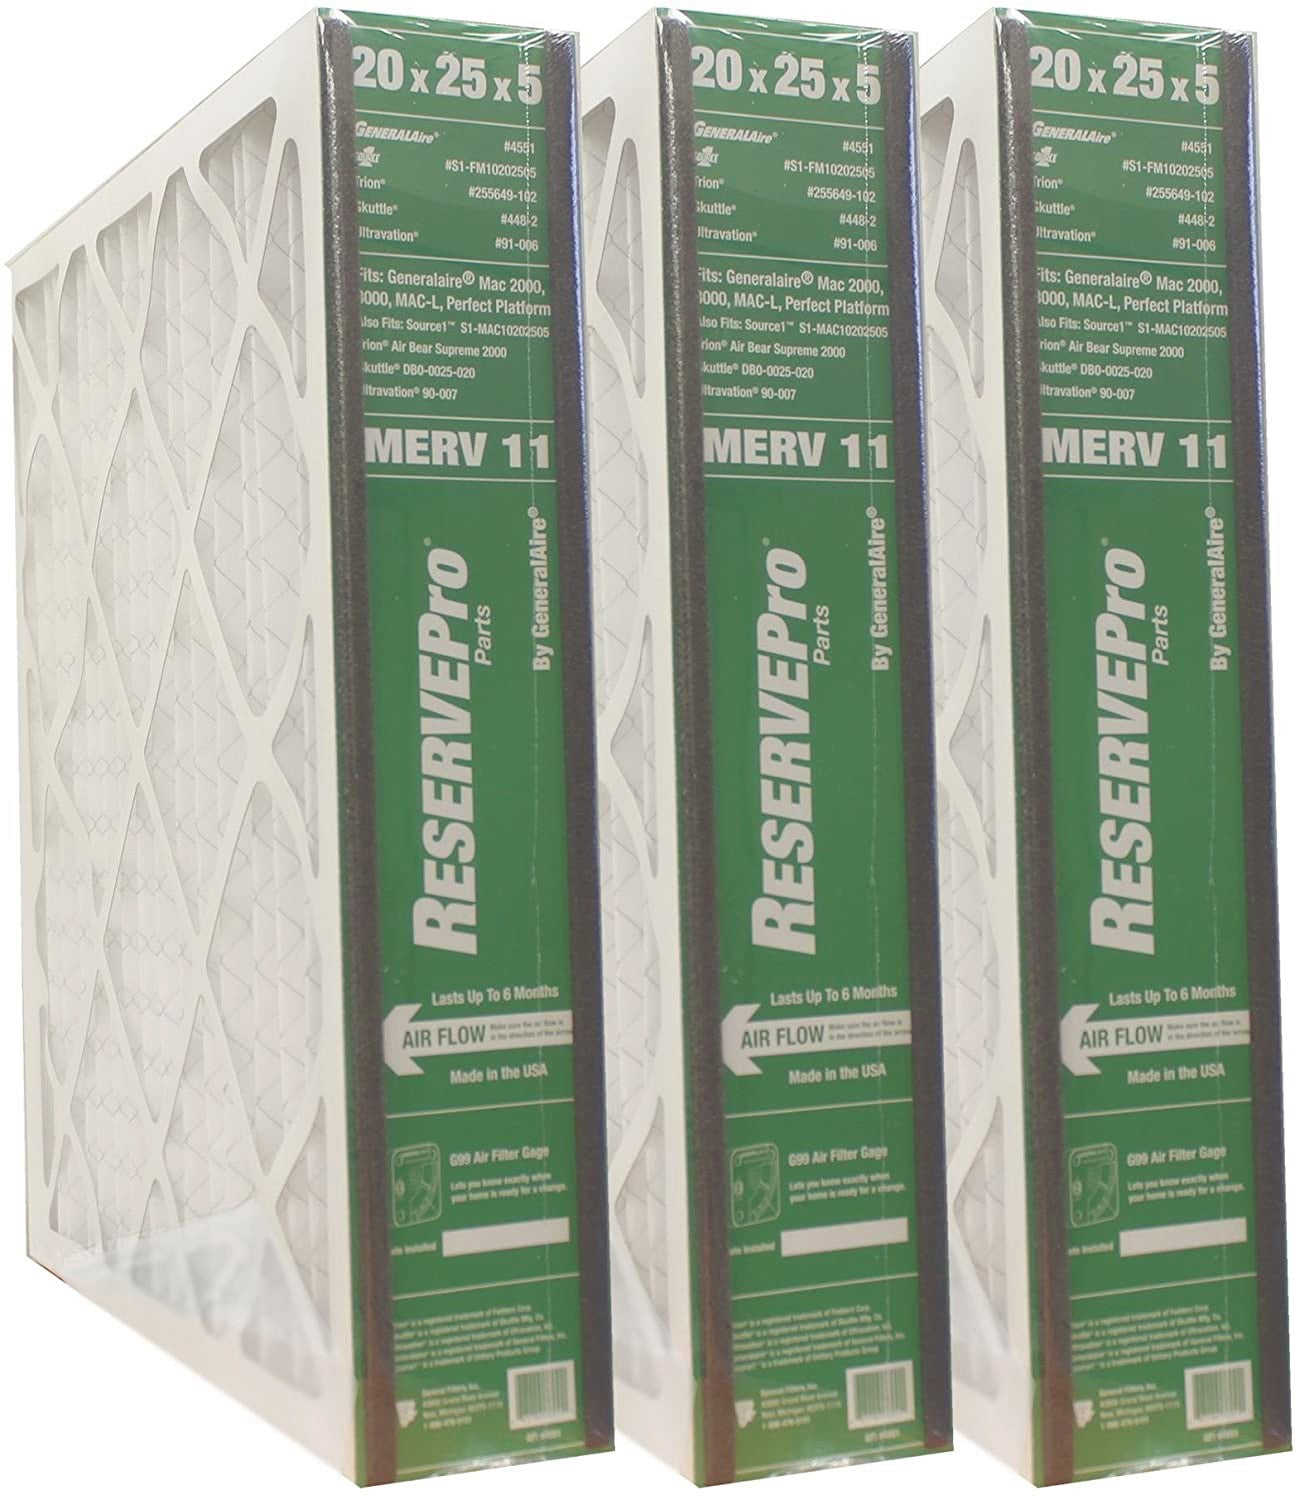 GeneralAire # 4551 for 4501 ReservePro 20 x 25 x 5 Furnace Filter